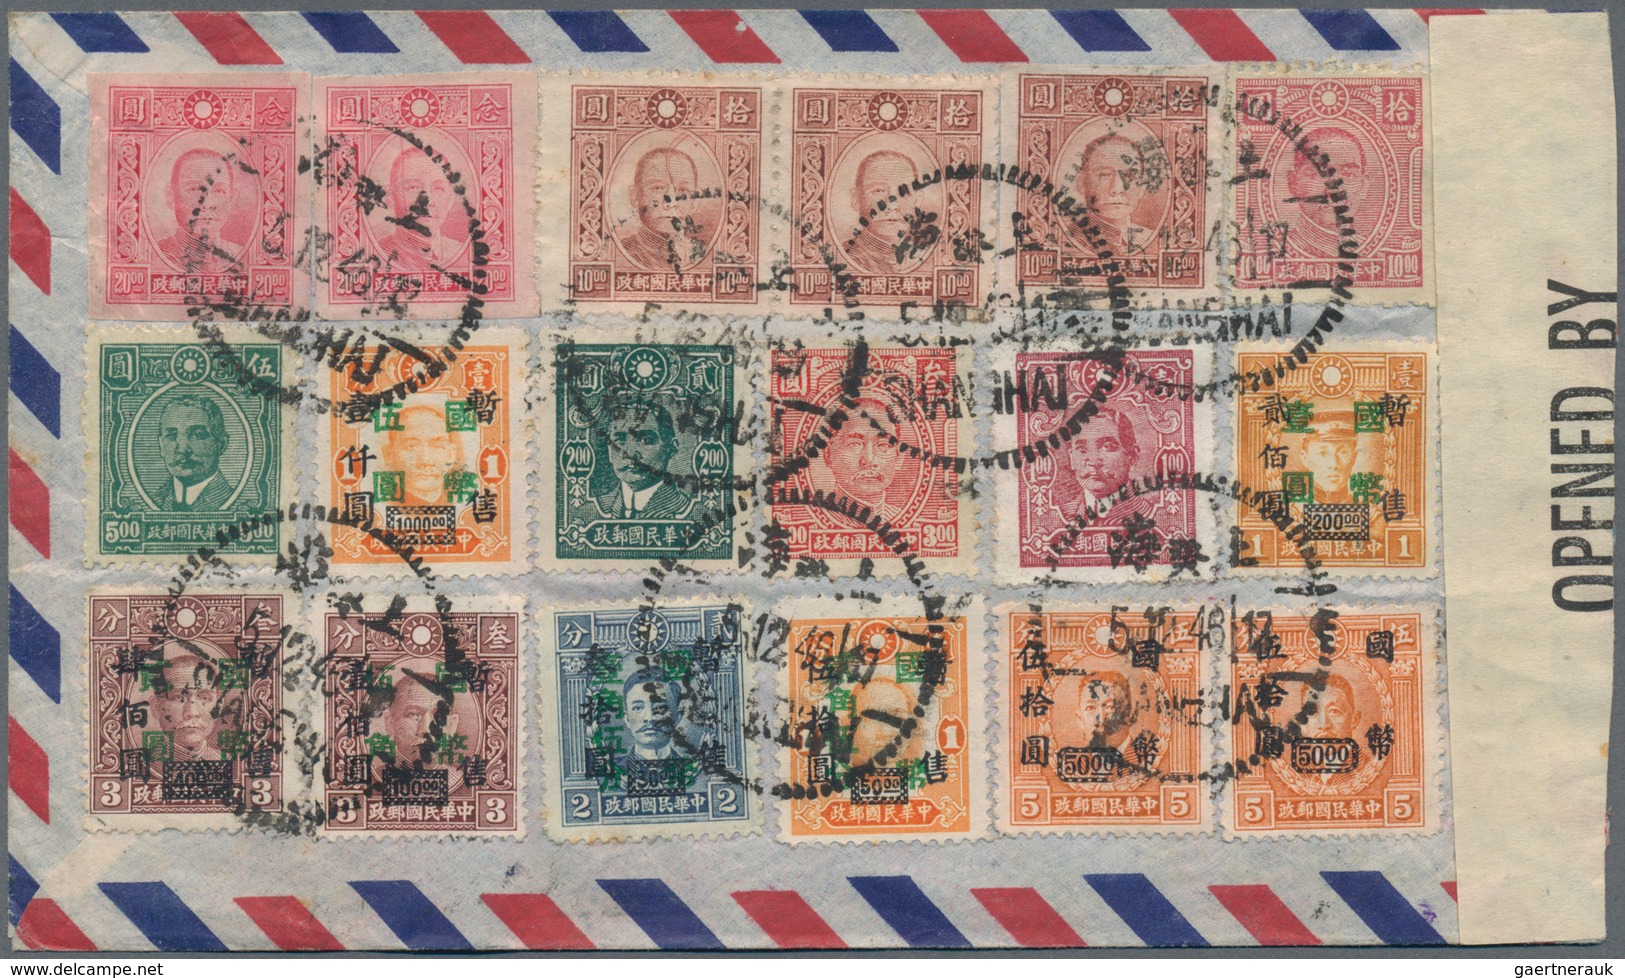 China: 1948/49, four covers with mostly gold yuan surcharges to Germany (2) or USA (2), inc. registr